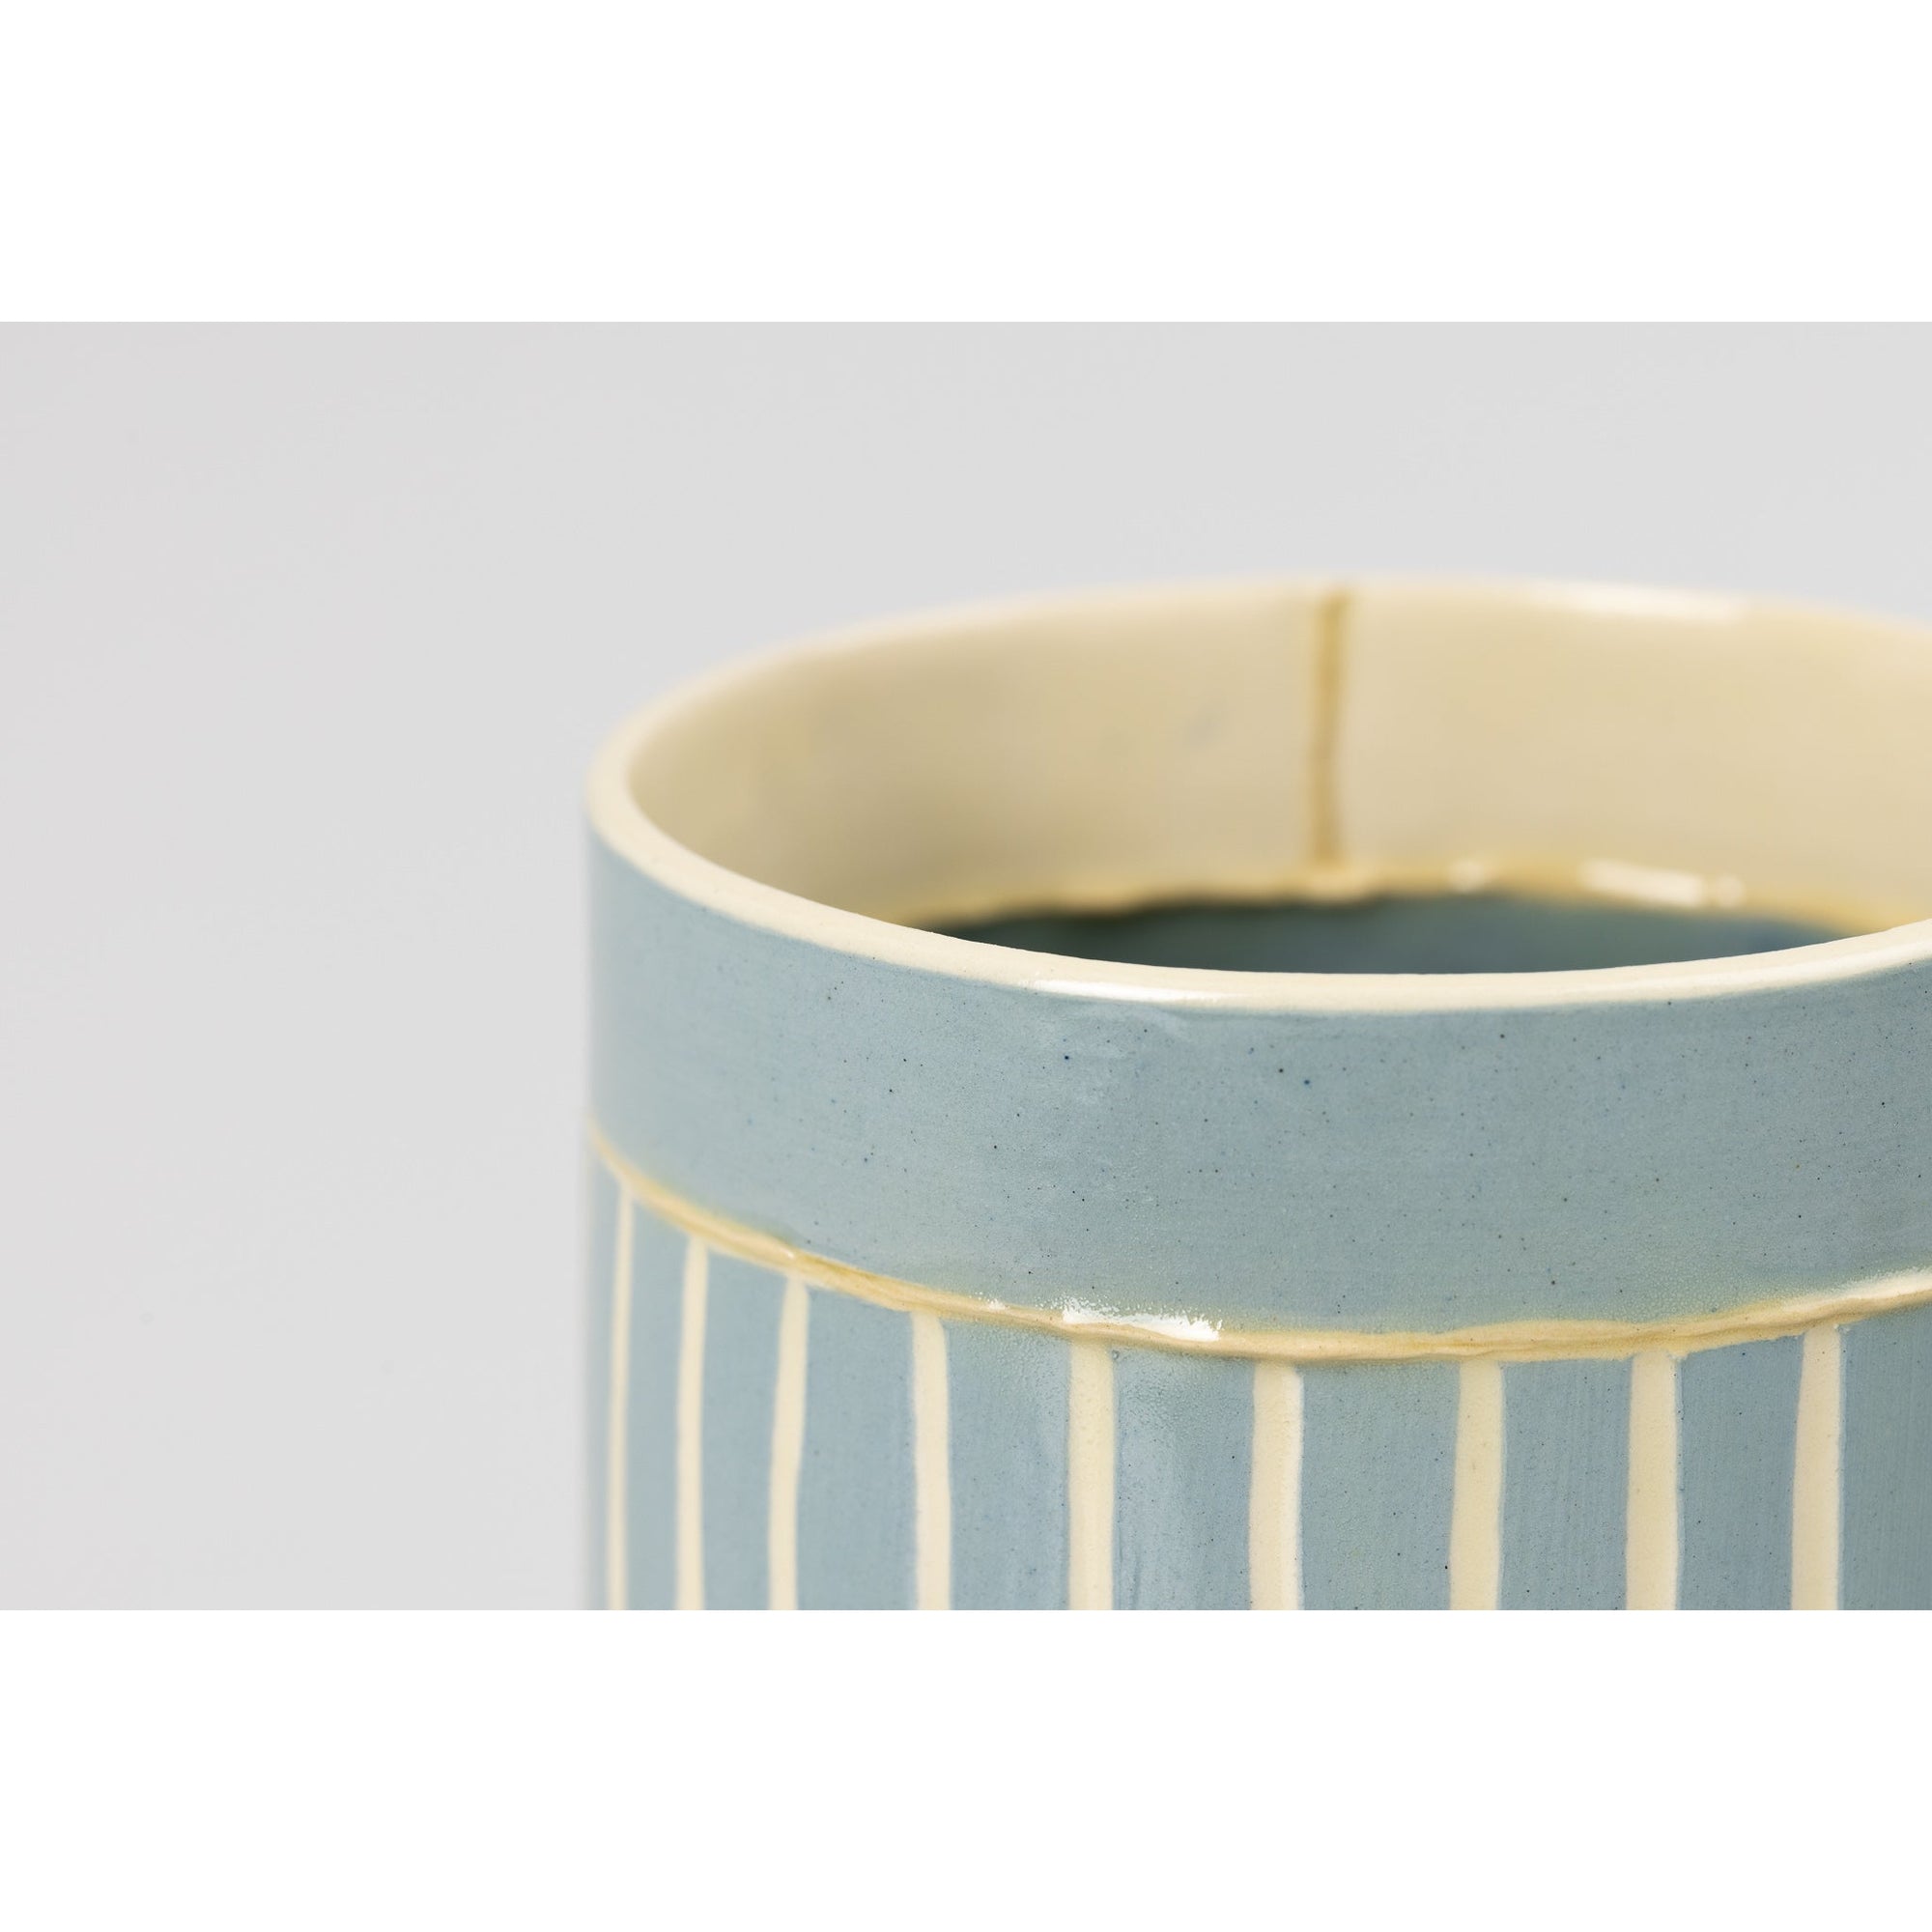 SV4 Small Vessel, handbuilt ceramic created by Emily-Kriste Wilcox, available from Padstow Gallery, Cornwall